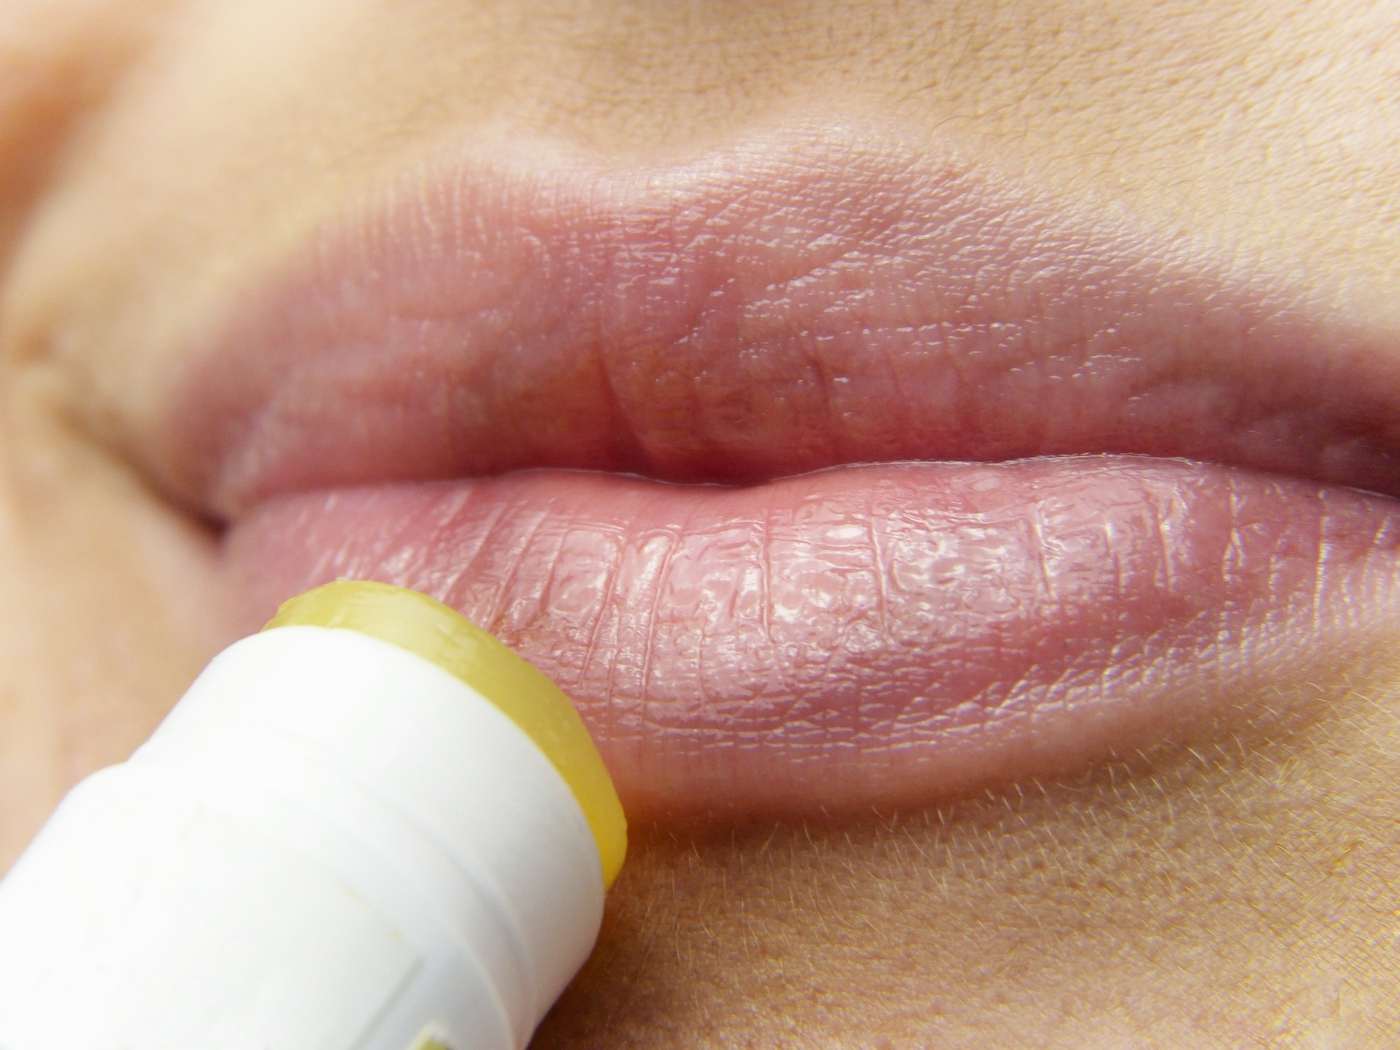 UV protection for lips and body is a herbal remedy for herpes simplex